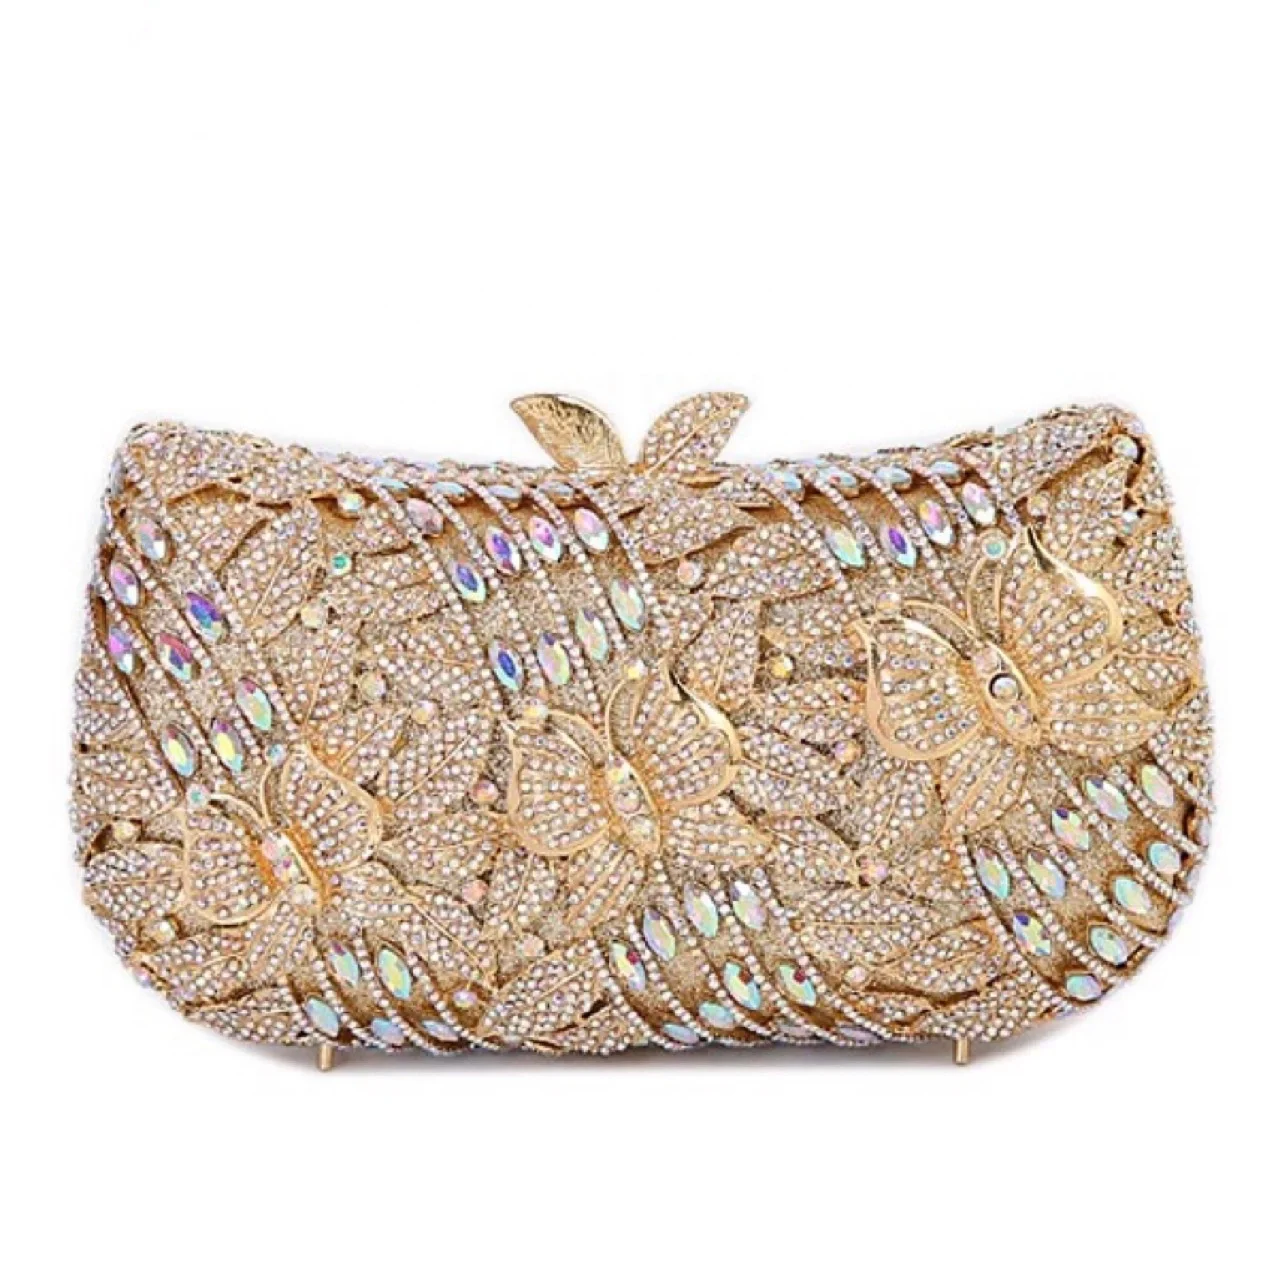 Amiqi MRY174Rhinestone Clutch Bag for Formal Party Butterfly Floral Evening Handbag Jewel